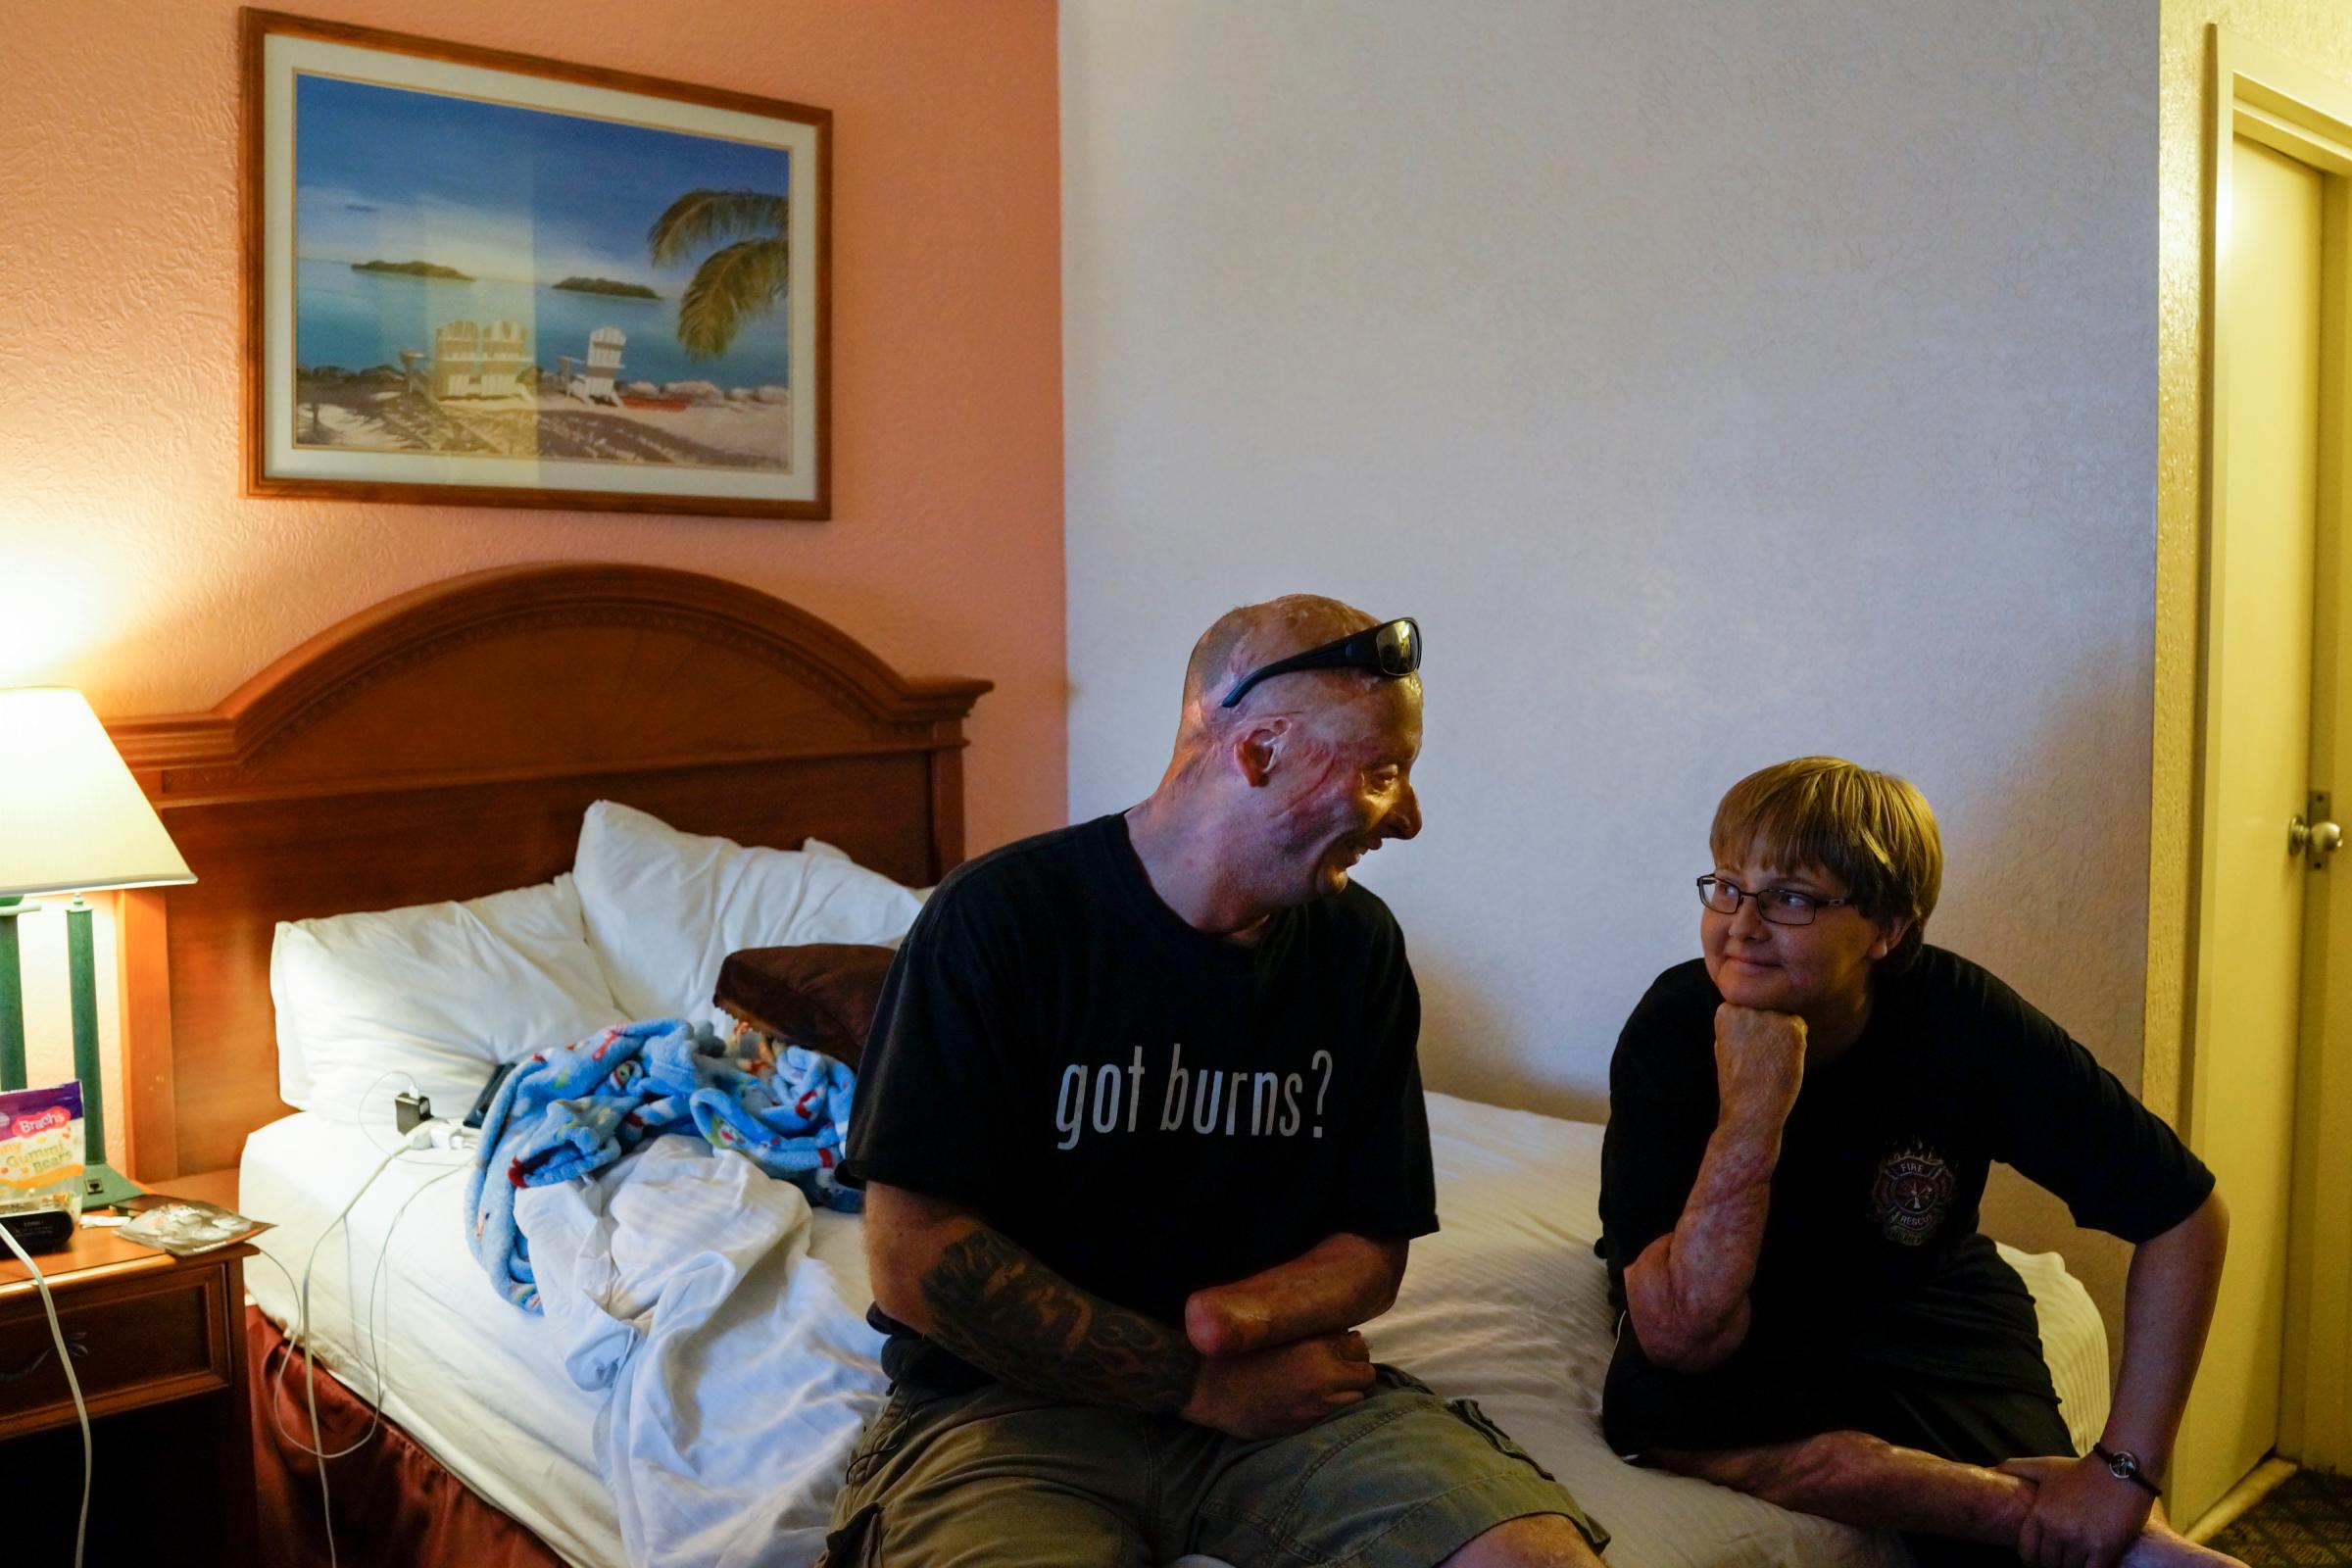 2013. Galveston, TX. USA. Bobby tells jokes to Grant, a 12-year old who was burned as a toddler and was about to undergo his 37th surgery. Bobby went to visit him to cheer him up. Bobby says "Most humans will never understand what it's like to be burnt. It's probably the most painful thing to recover from. Surgeries are my biggest fear. I'd go back to Iraq in a second, but tell me i've got another surgery and I'm going to freak out." Bobby Henline, 41, veteran of four tours to Iraq and sole survivor of an IED blast that killed the other four soldiers in his humvee in Iraq in 2007. He is now a standup comedian launching a new career with a routine built around his injuries. He received burns over 38% of his body in the blast.